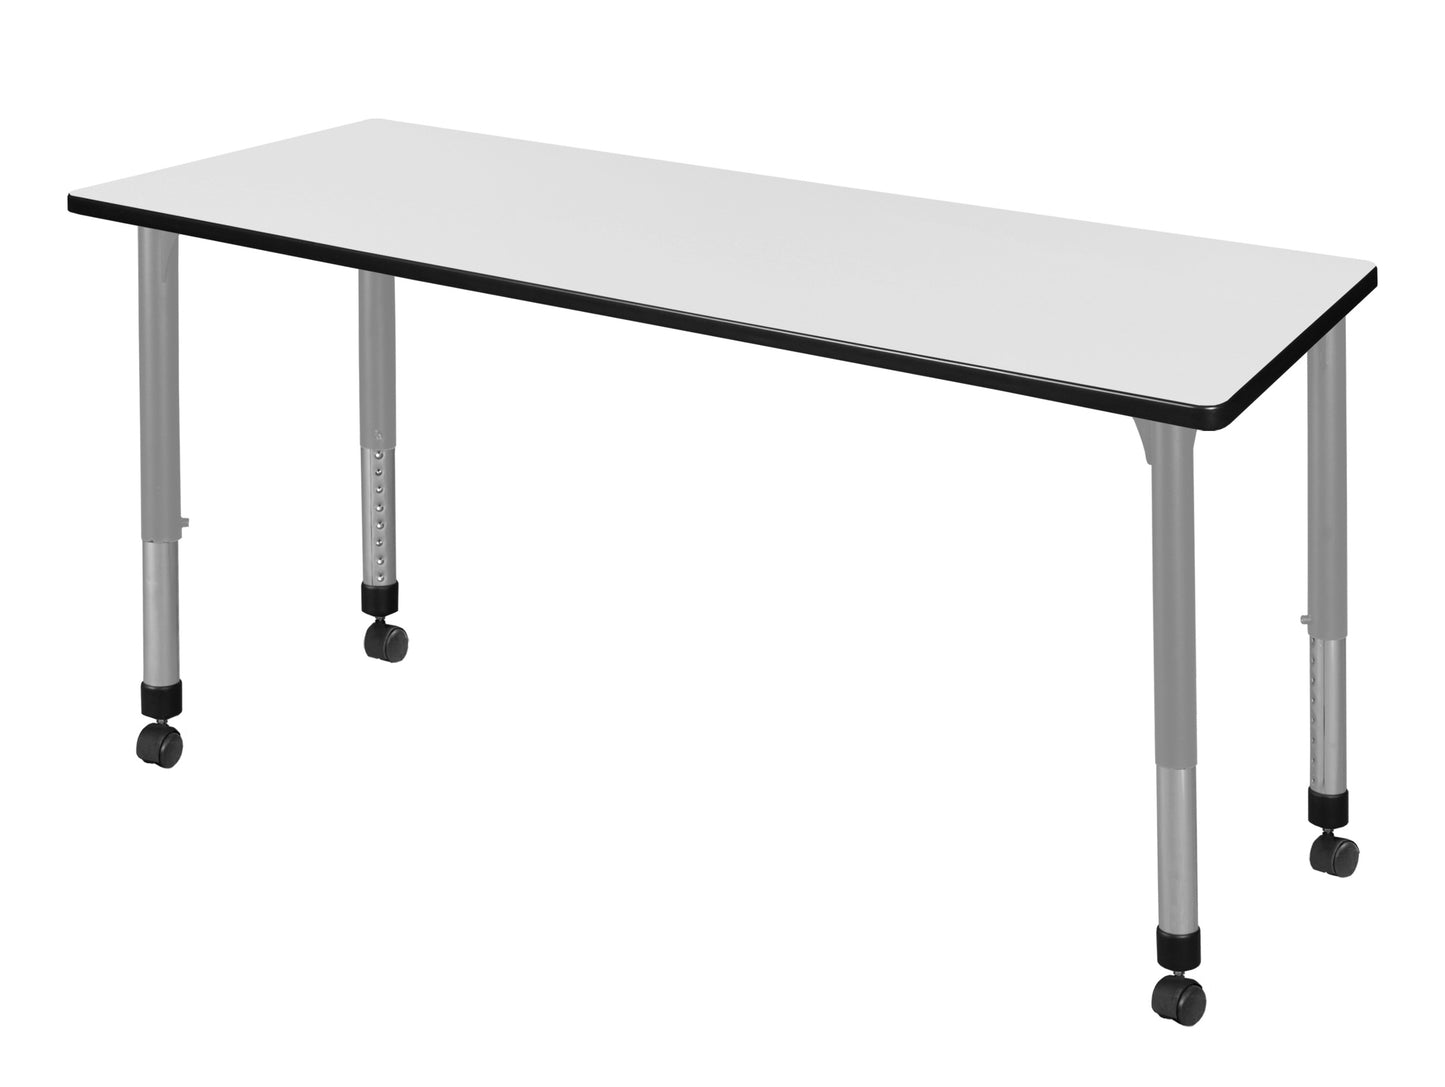 Regency Kee 60 x 24 in. Height Adjustable Mobile Classroom Activity Table